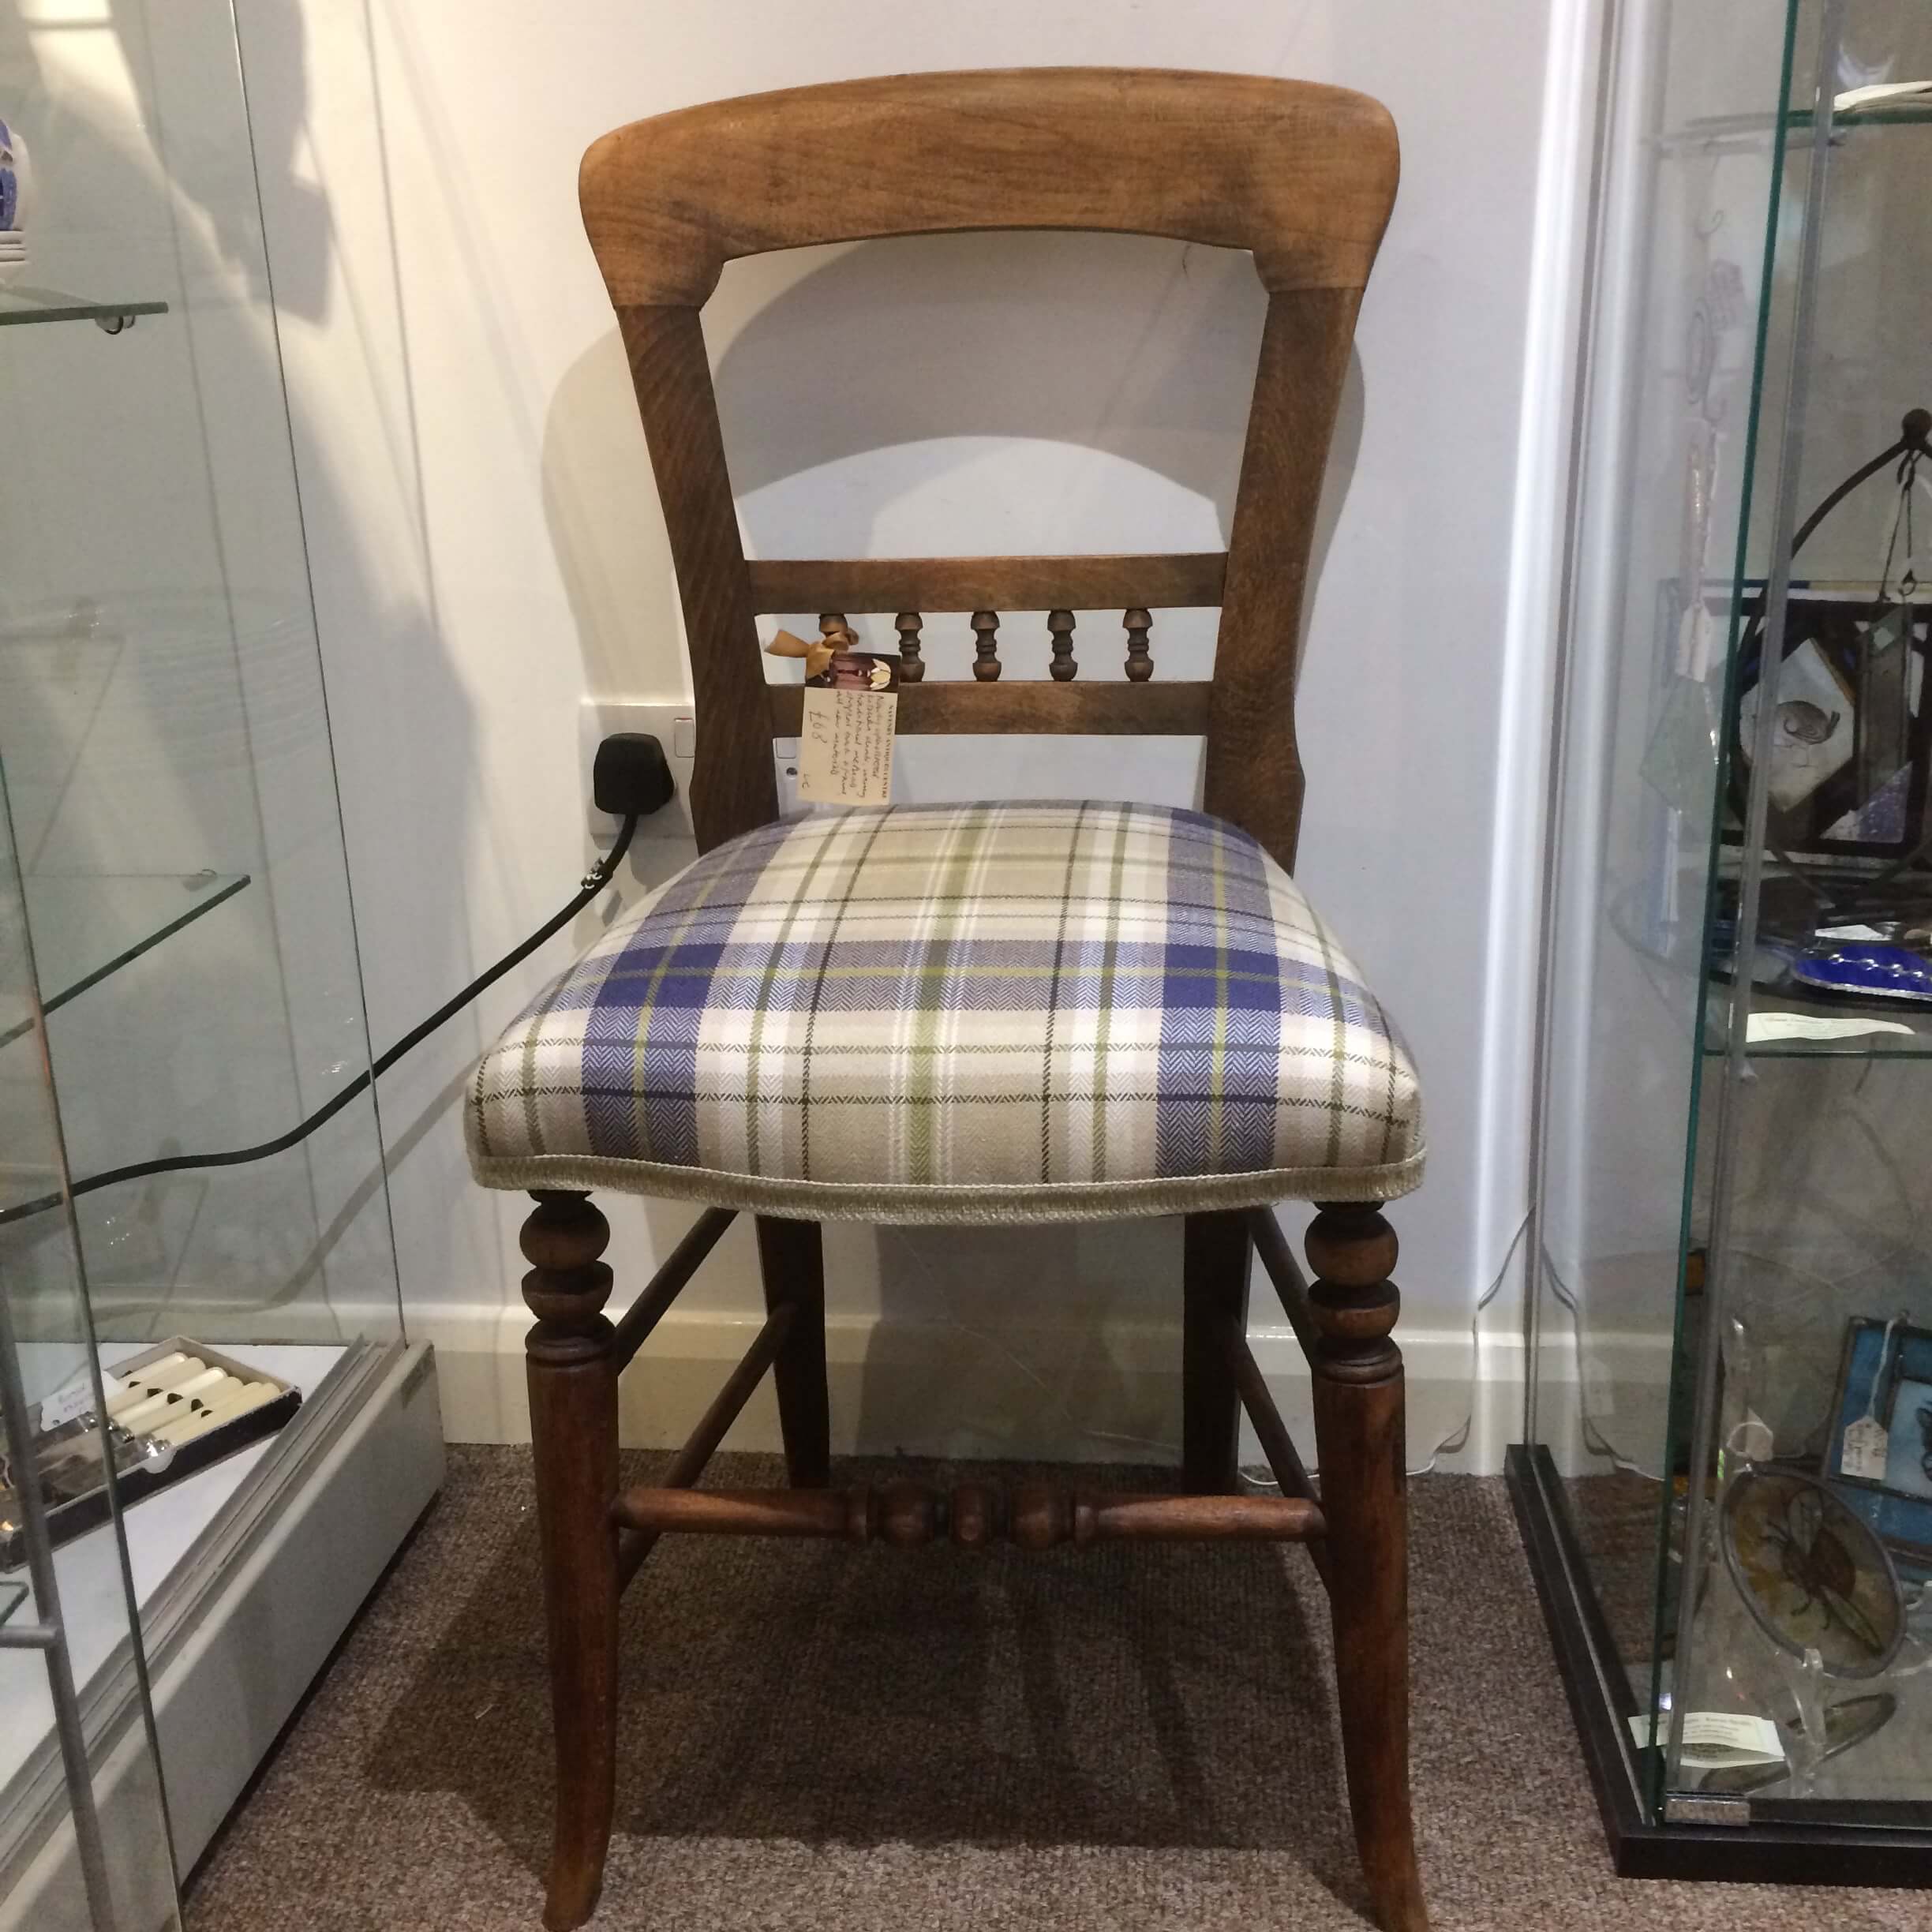 Newly Upholstered Kitchen Chair